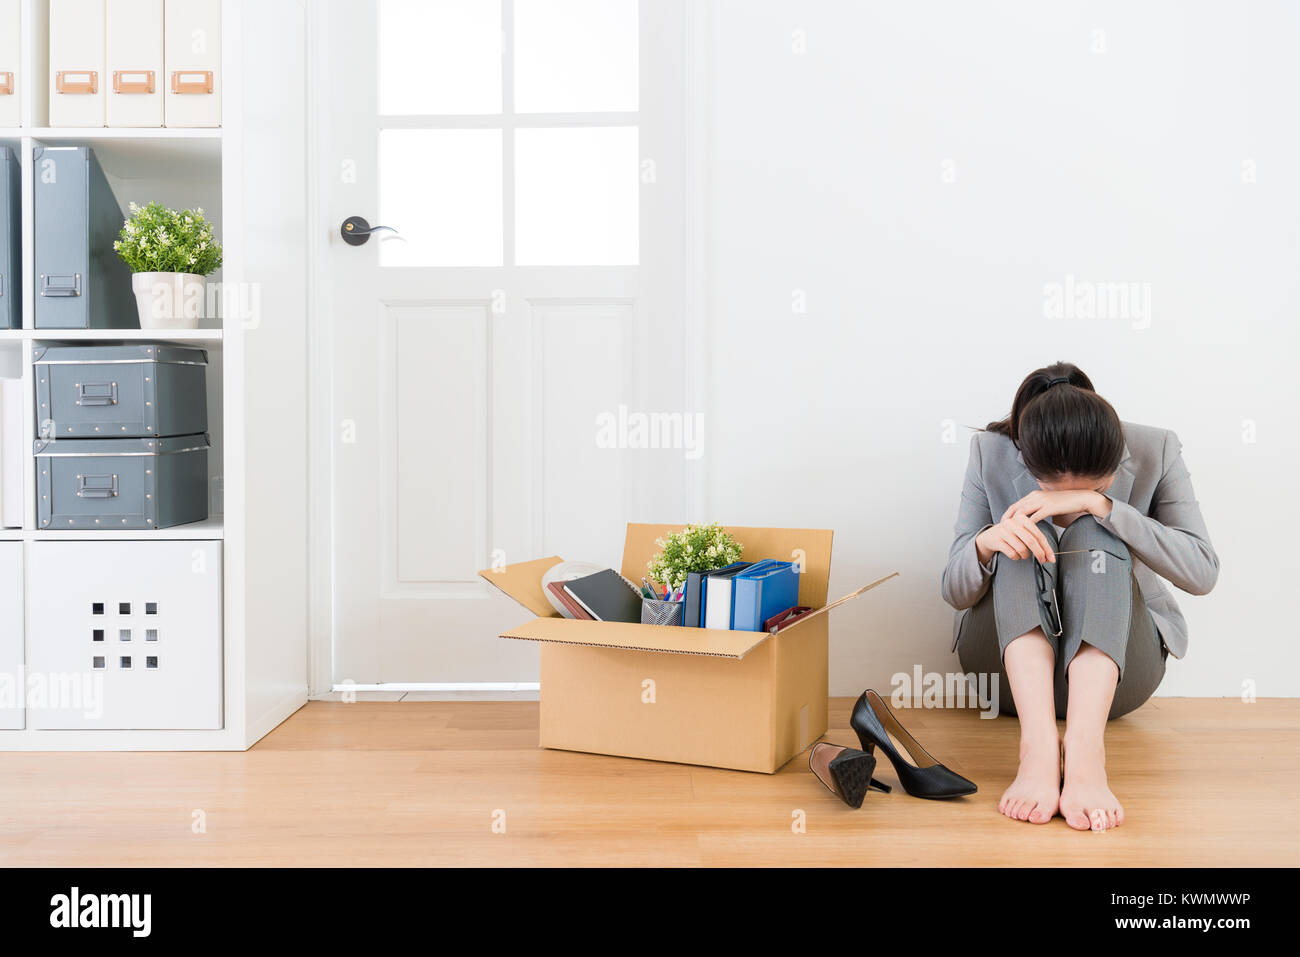 sadness pretty business manager woman unemployed sitting on wood floor crying with personal office items box. Stock Photo